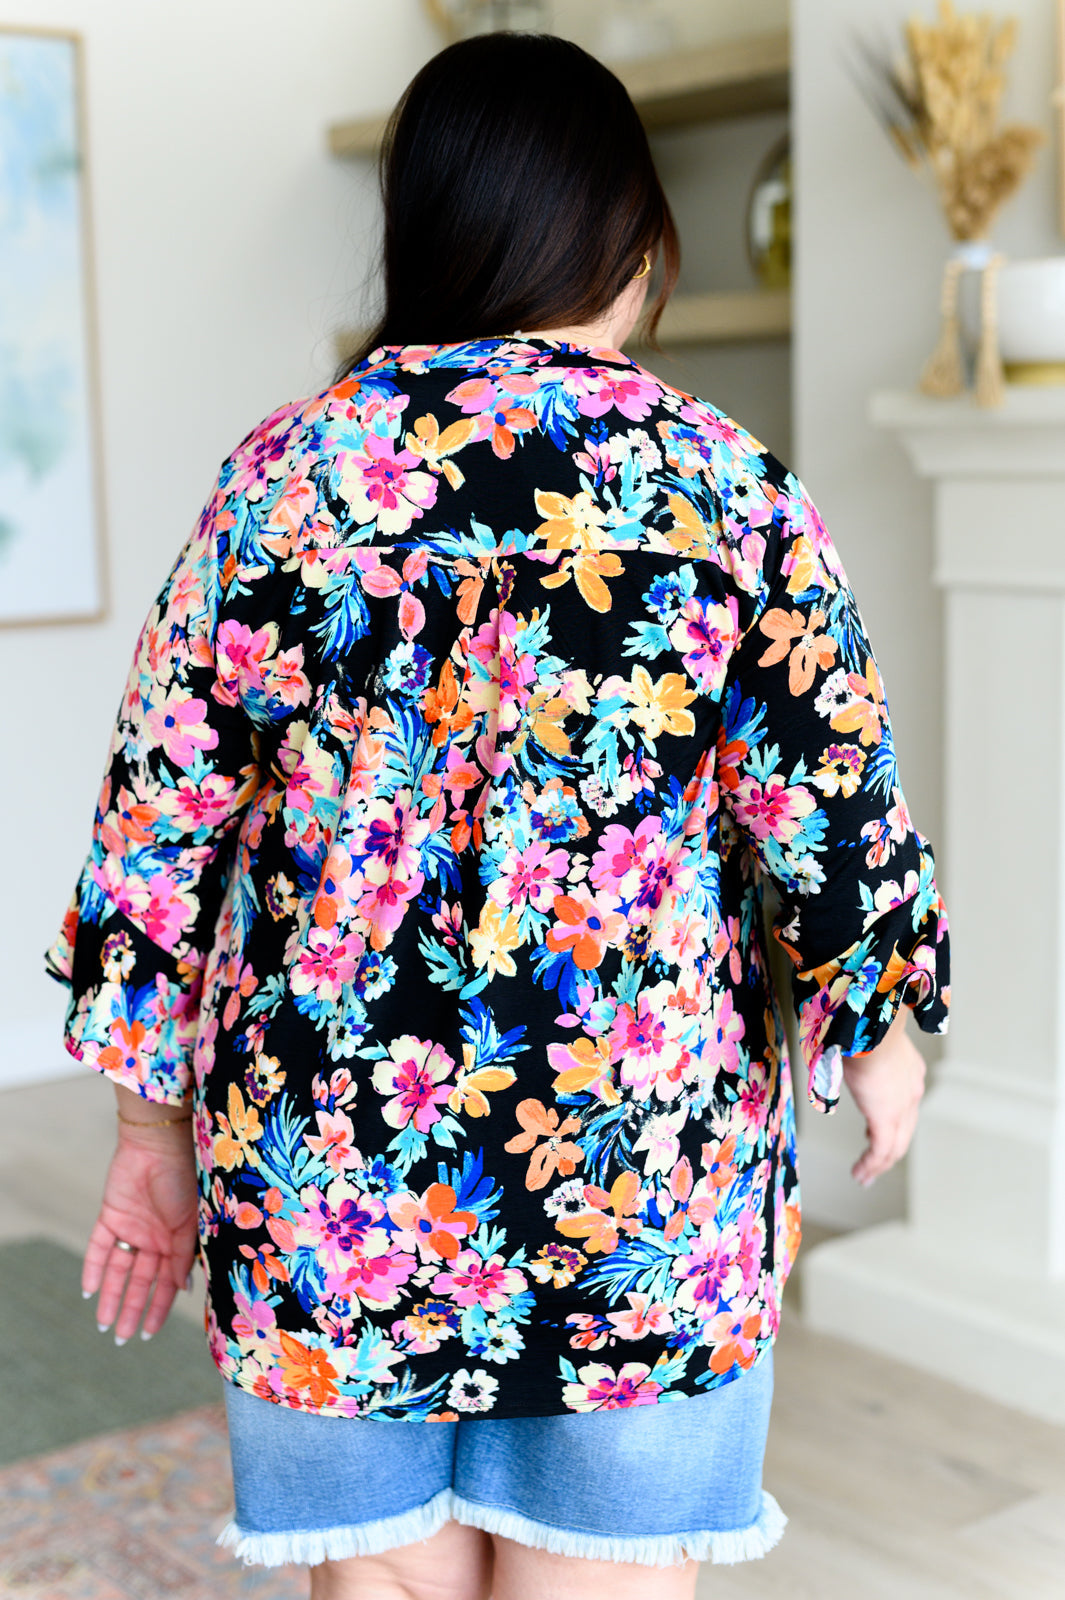 Bell-Sleeve Top Black and Teal Tropical Floral